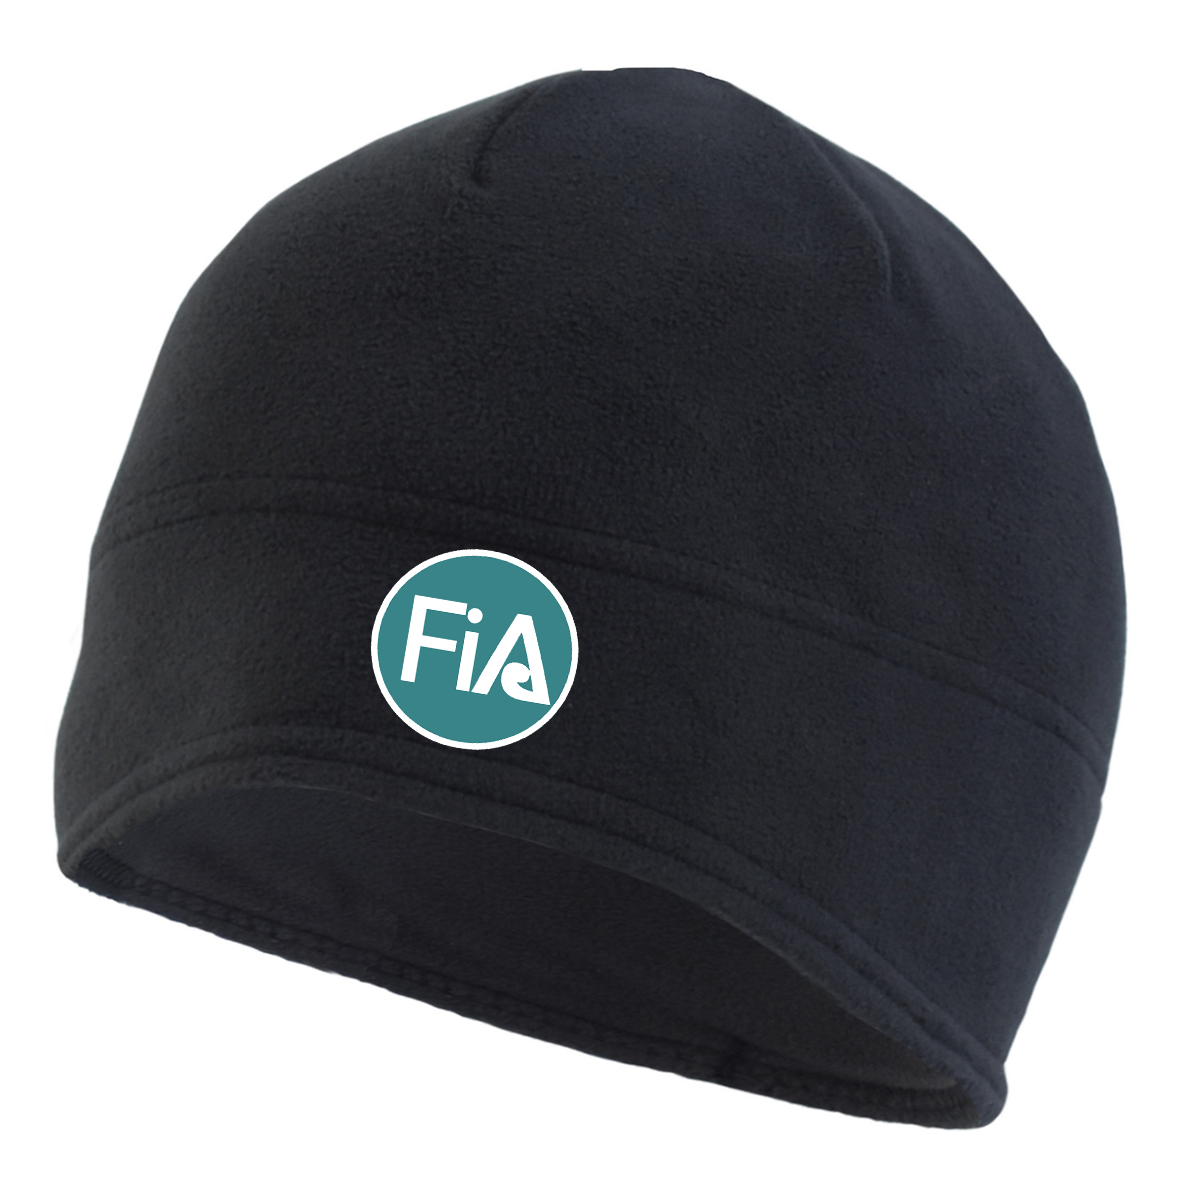 CLEARANCE ITEM - FiA Trailheads Microfleece Hat w/ Ponytail Opening (Solid Black)